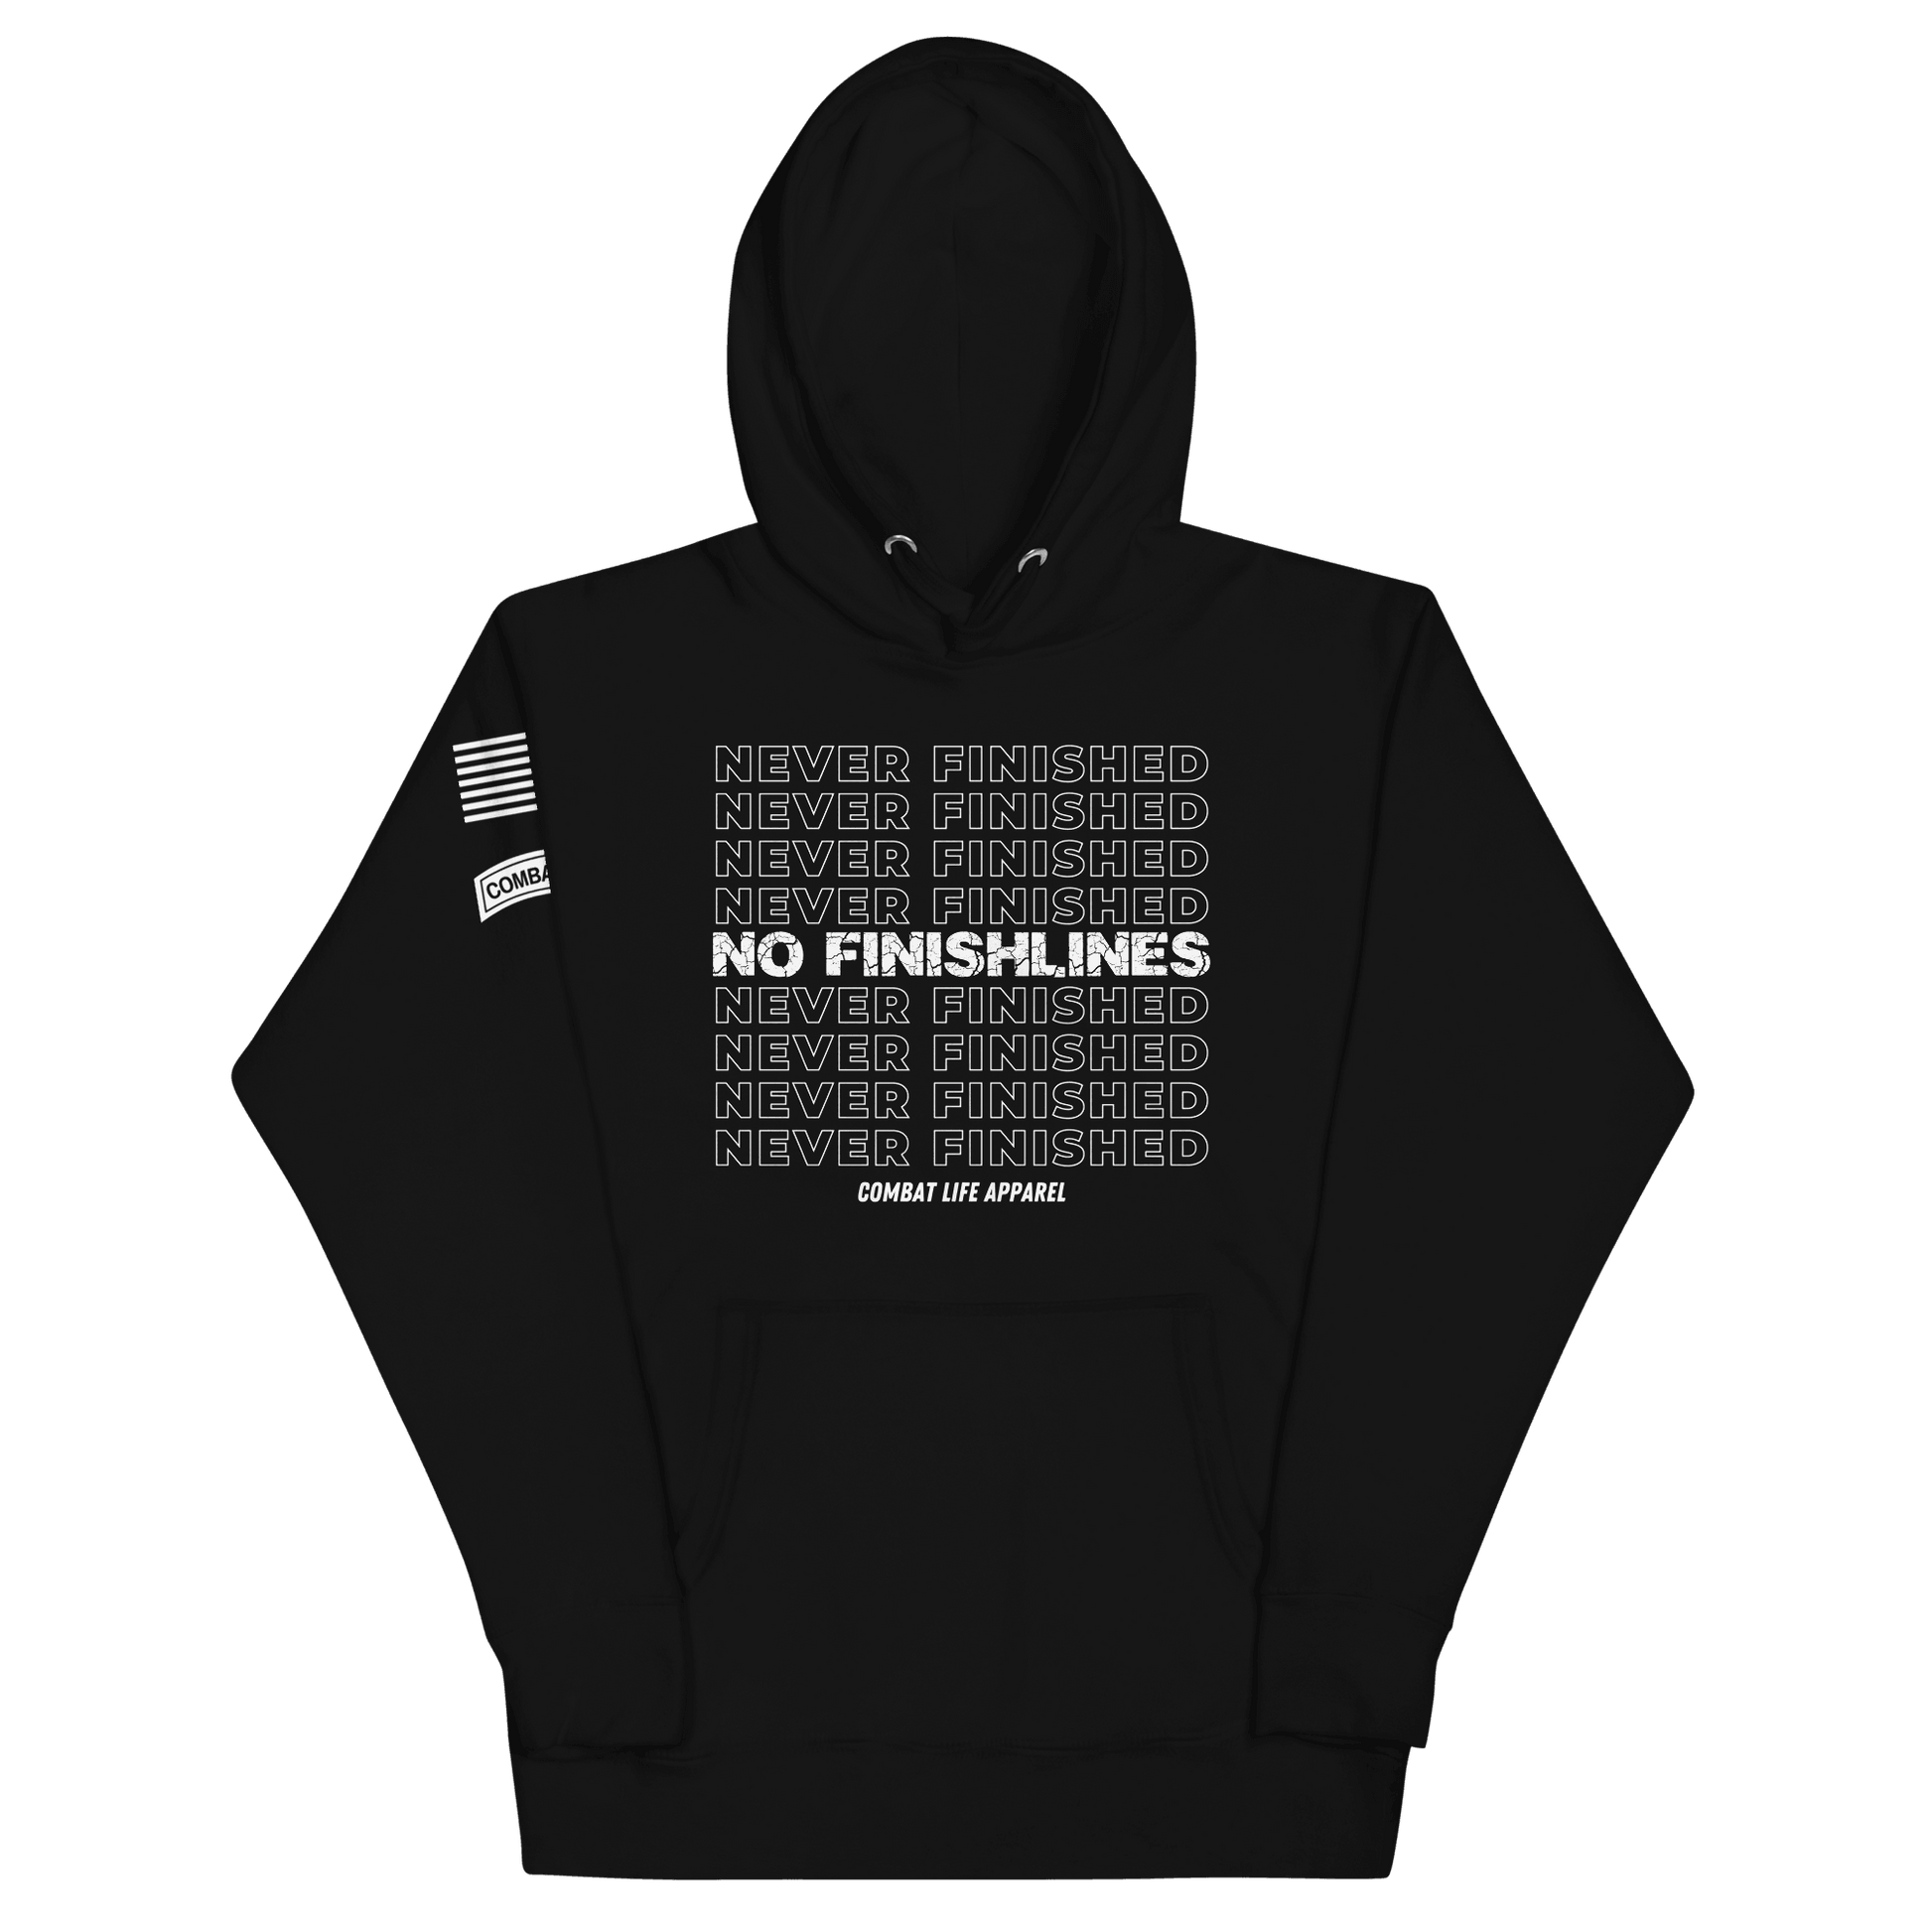 NEVER FINISHED Hoodie - Combat Life Apparel